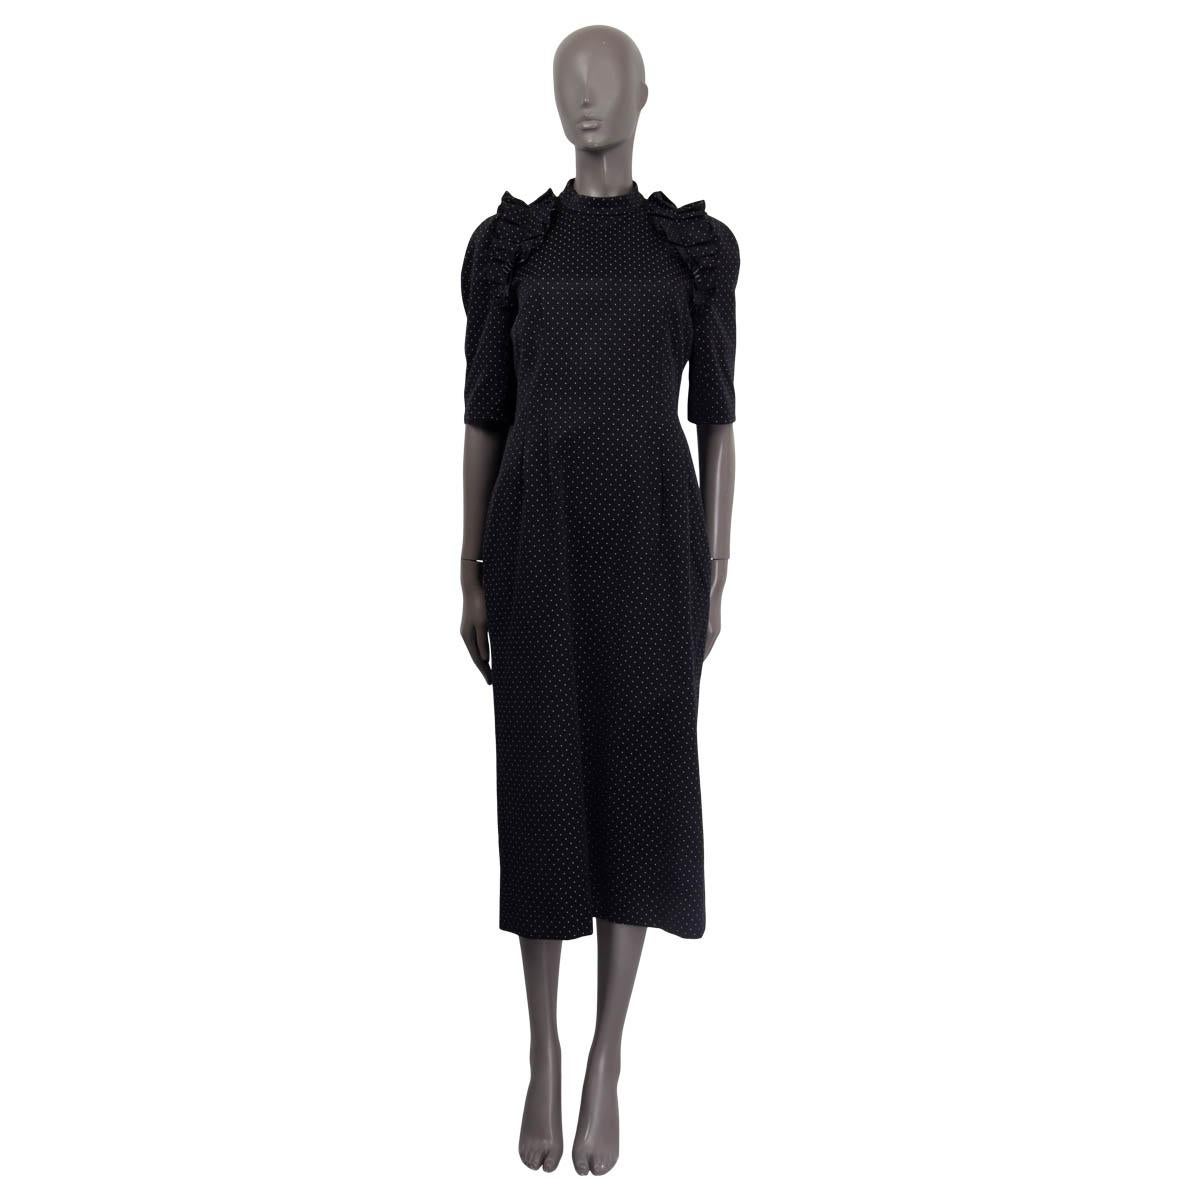 100% authentic Erdem 'Margaretta' midi dress in black and white cotton (63%) and polyester (37%). Features ruffled details on the shoulders and short sleeves. Has a slit on the back. Opens with a concealed zipper and two buttons on the back. Lined